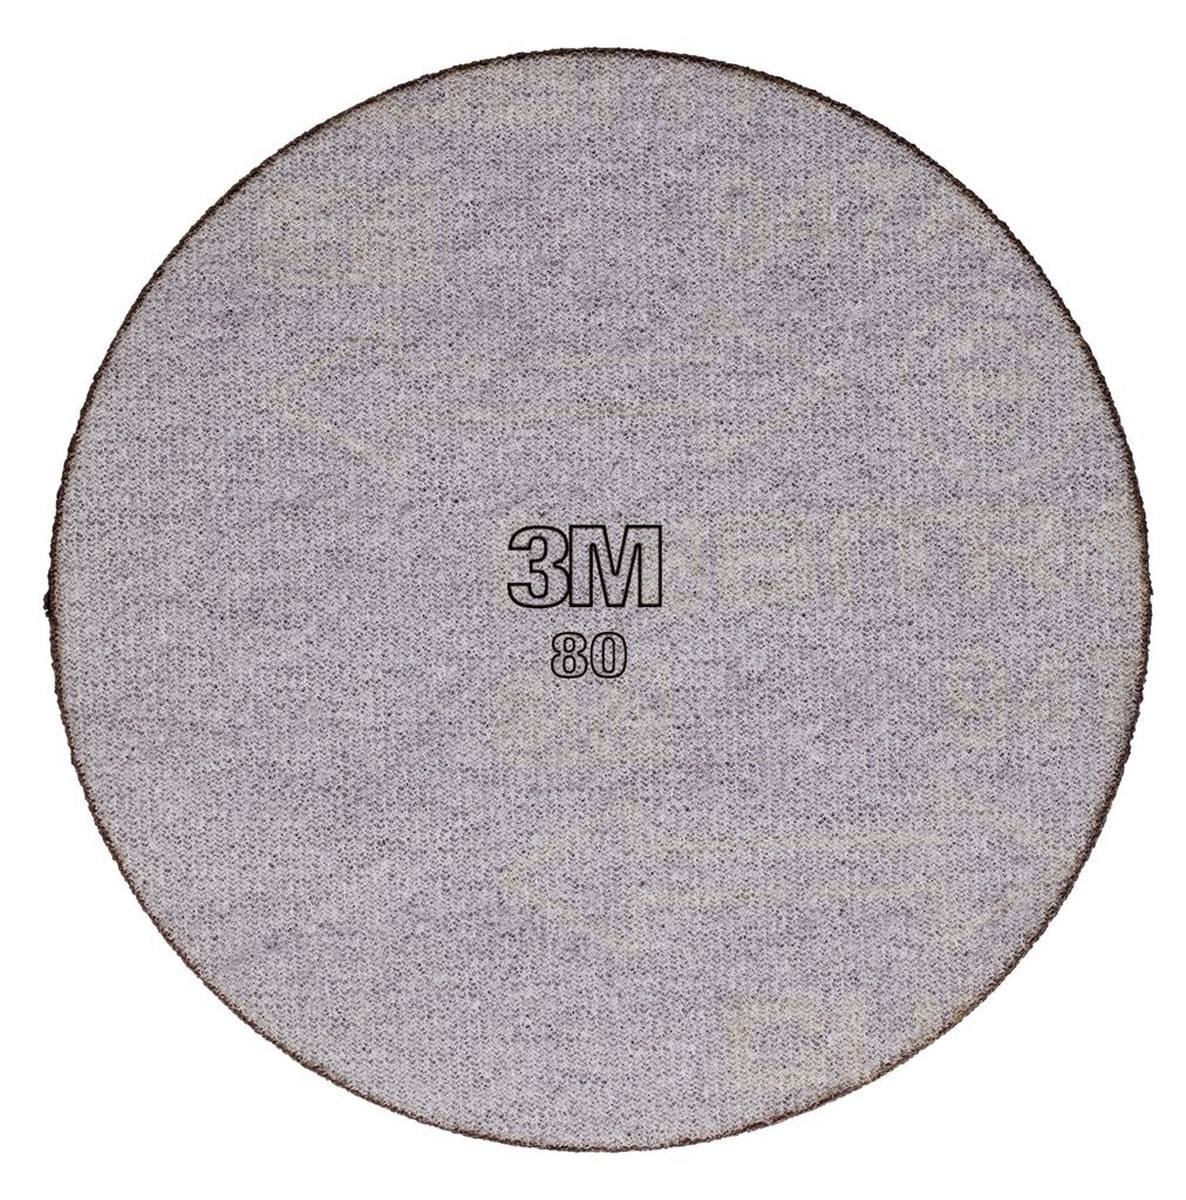 3M Cubitron II Hookit fabric disk 947A, 75 mm, 80 , unperforated